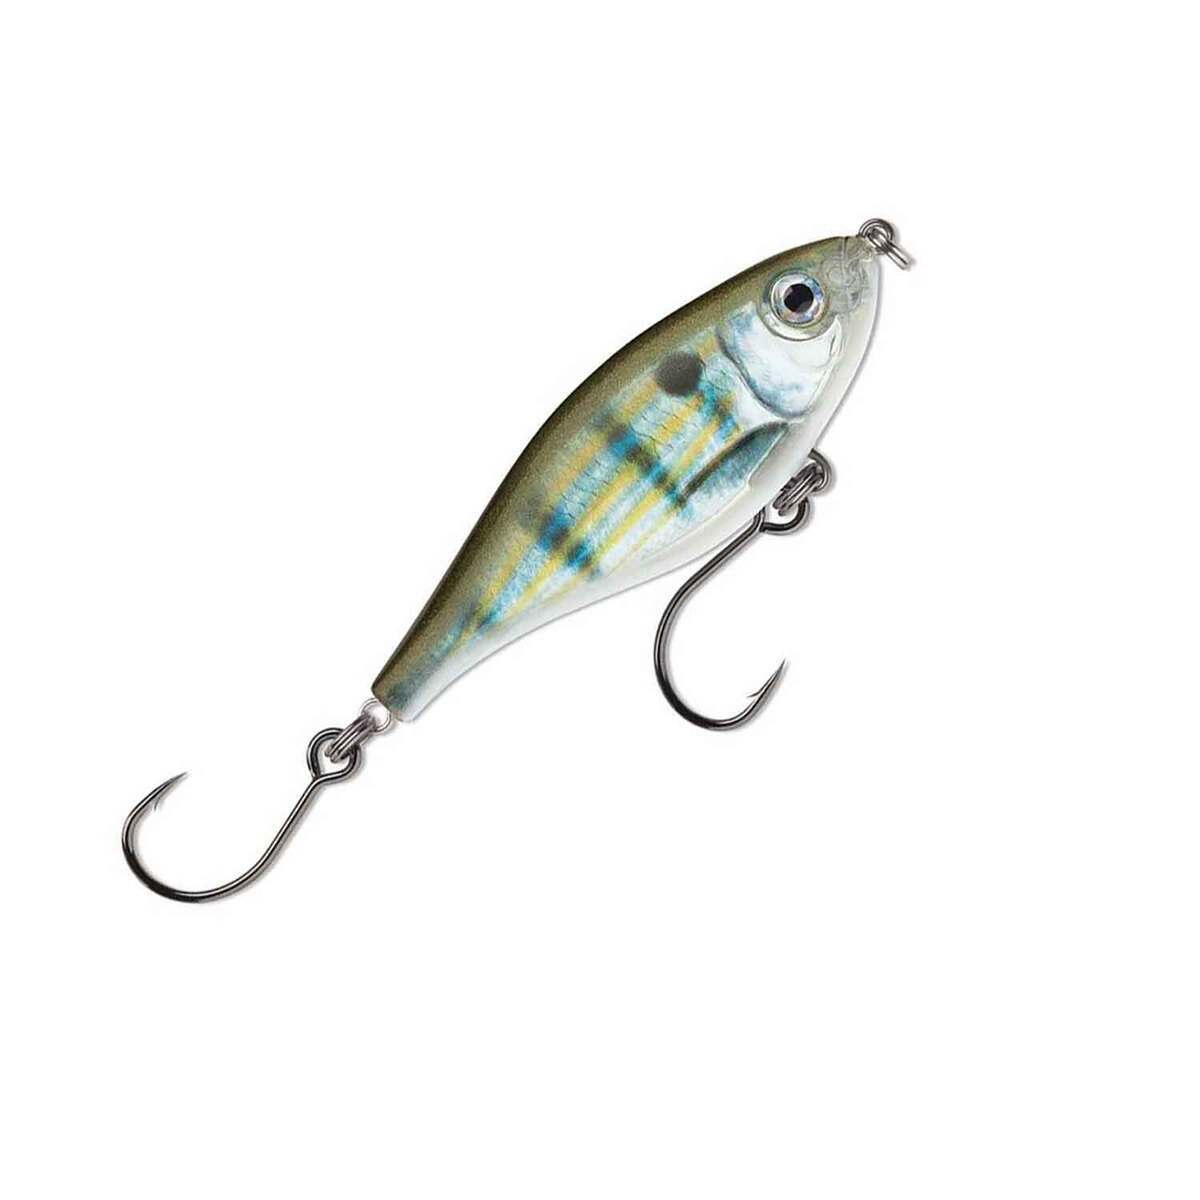 Fishing Lures Accessories Twitching Lures Twitch Stock Photo